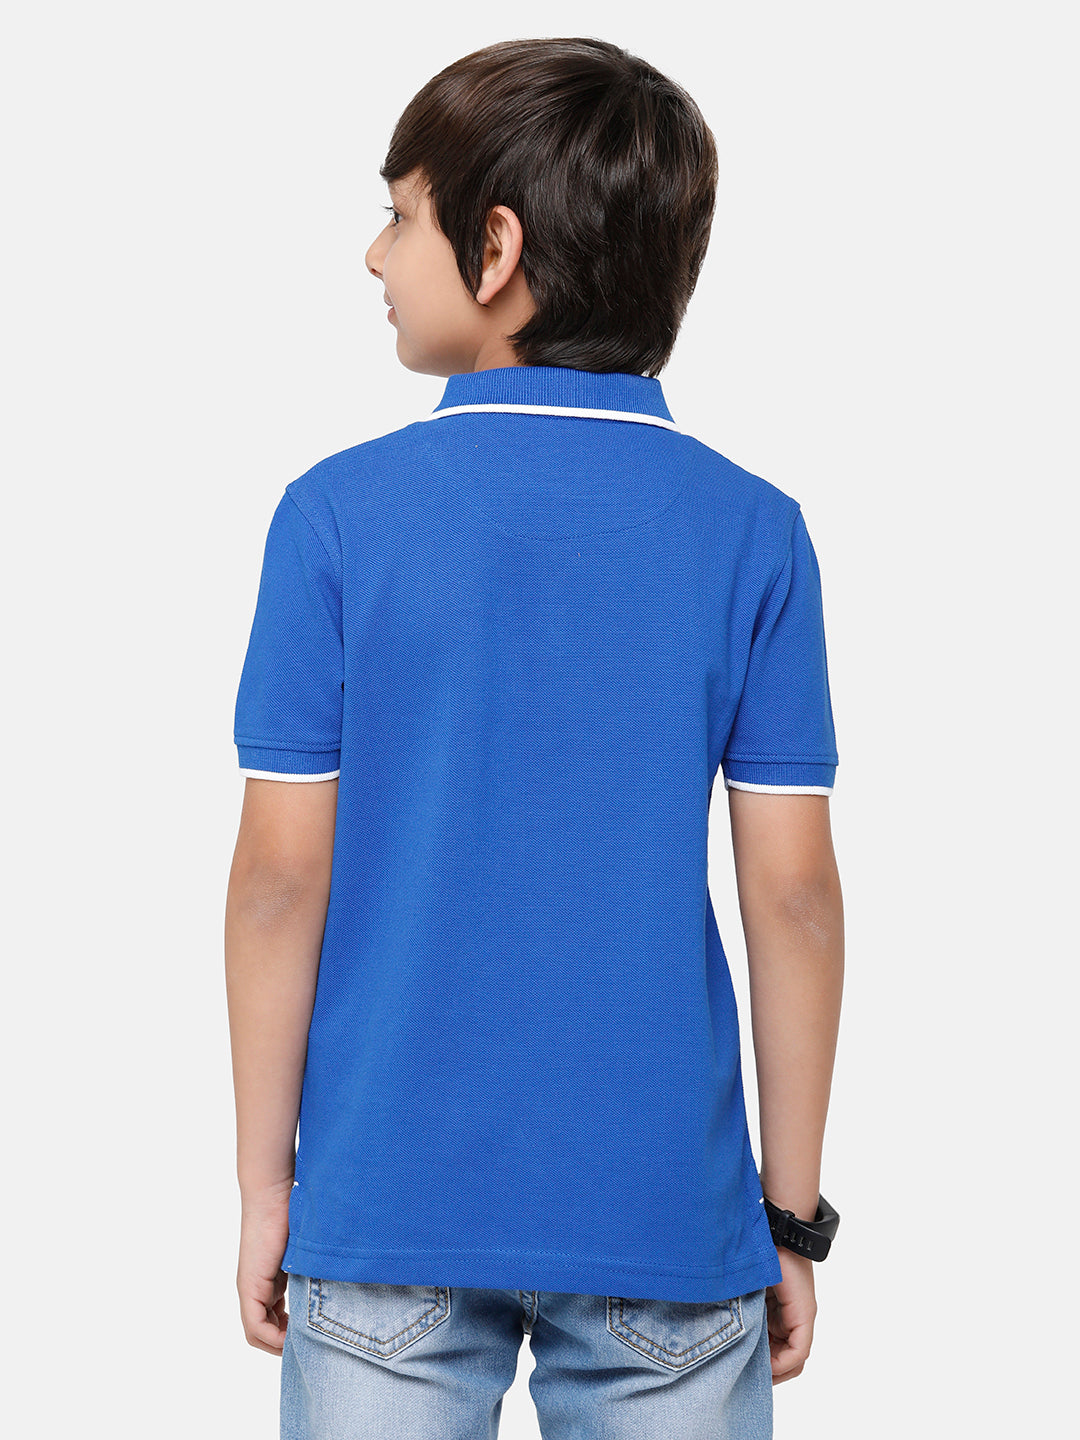 CP Boys Blue Solid Slim Fit Polo Neck T-Shirt T-shirt Classic Polo 